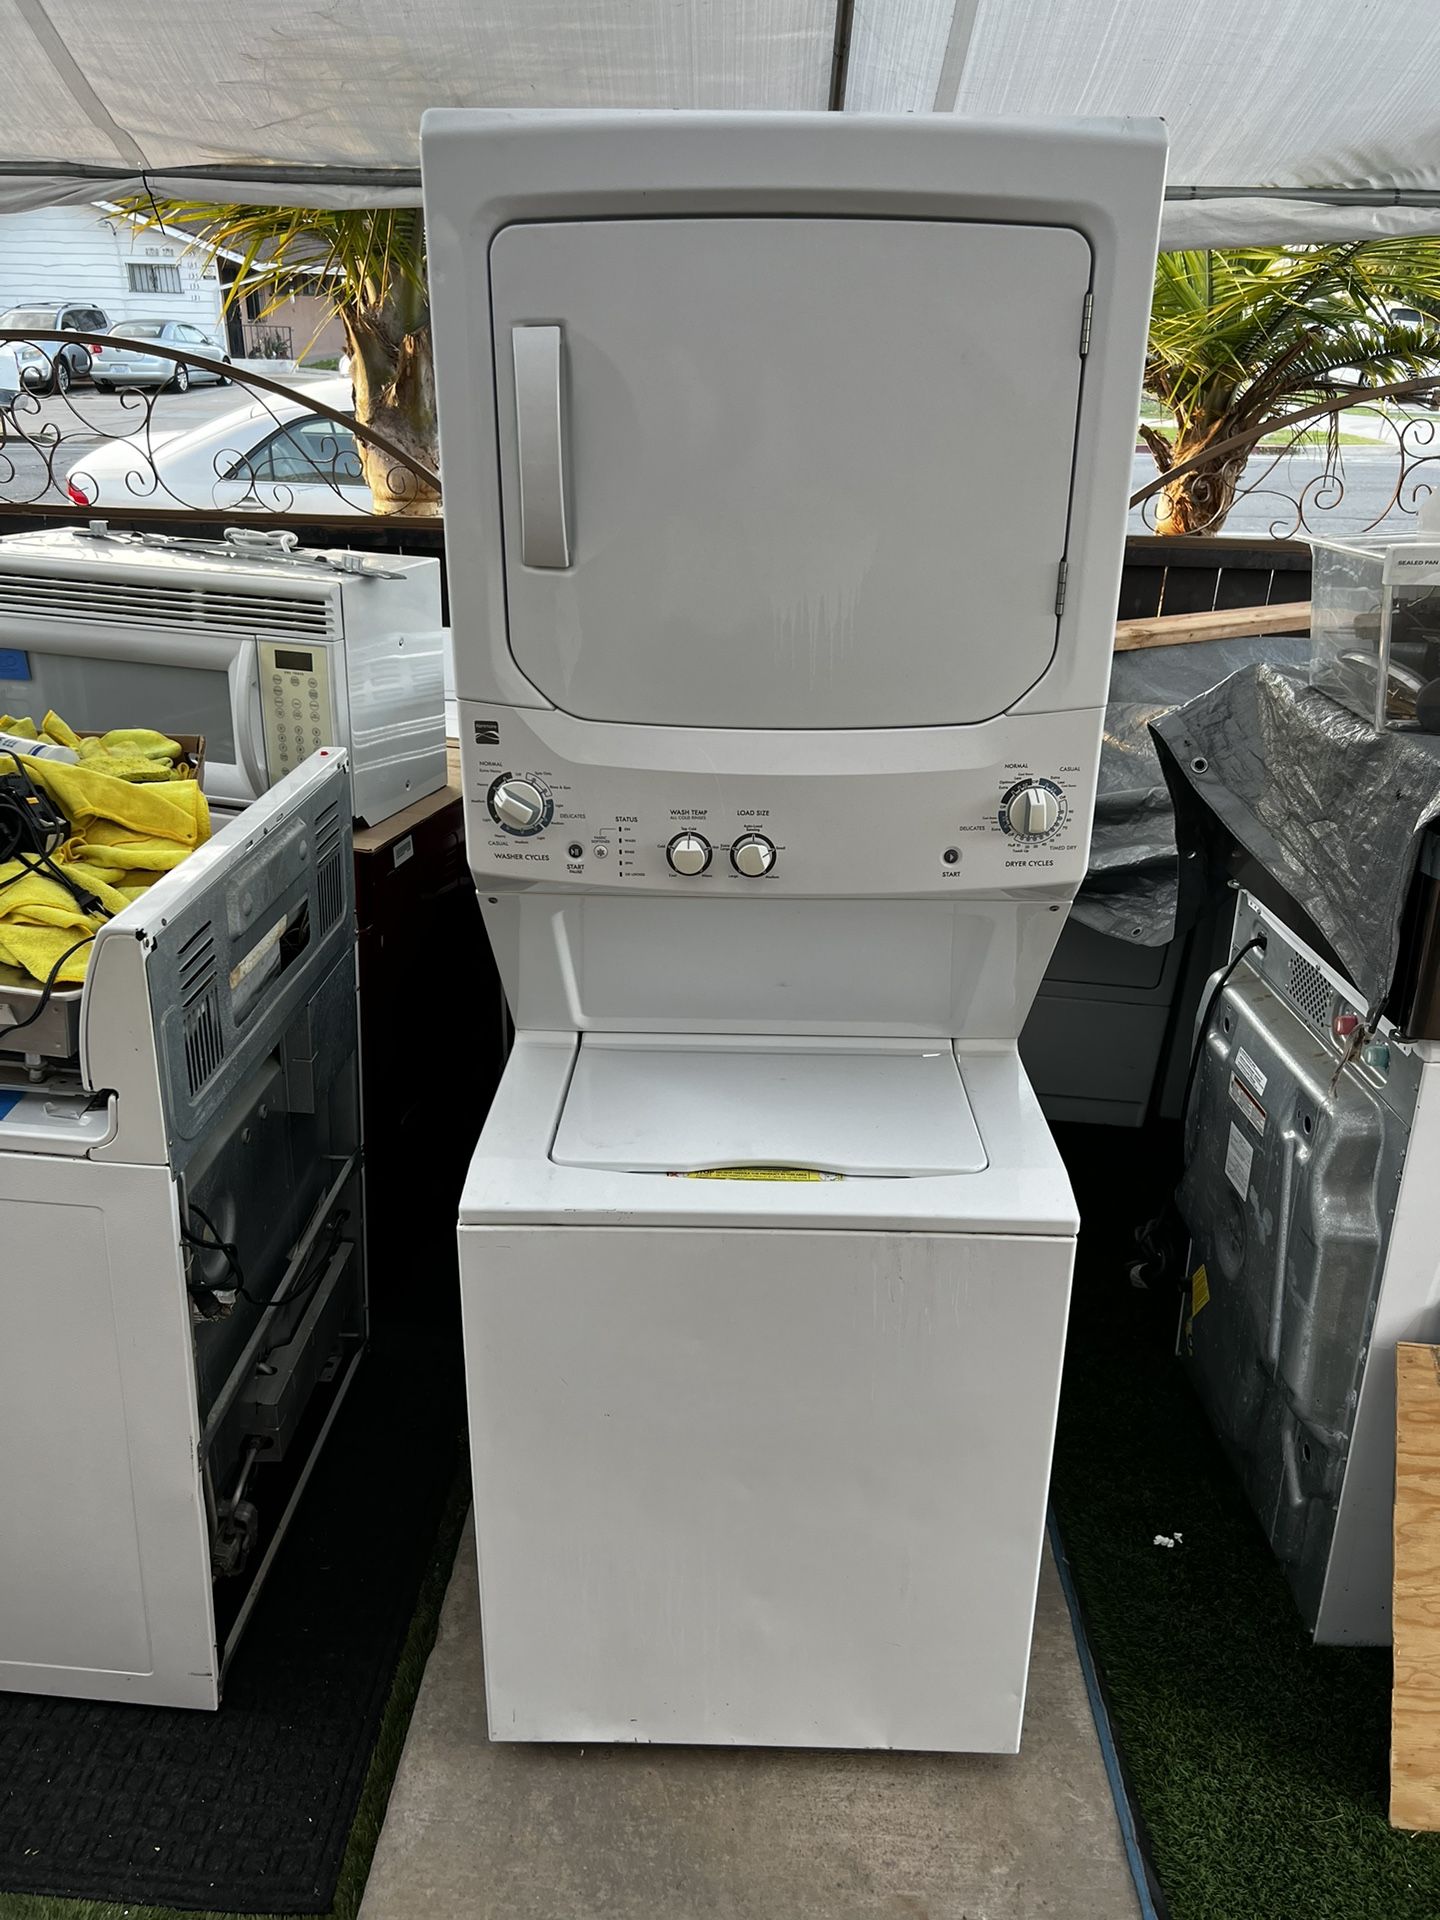 Kenmore Washer & Gas Dryer.